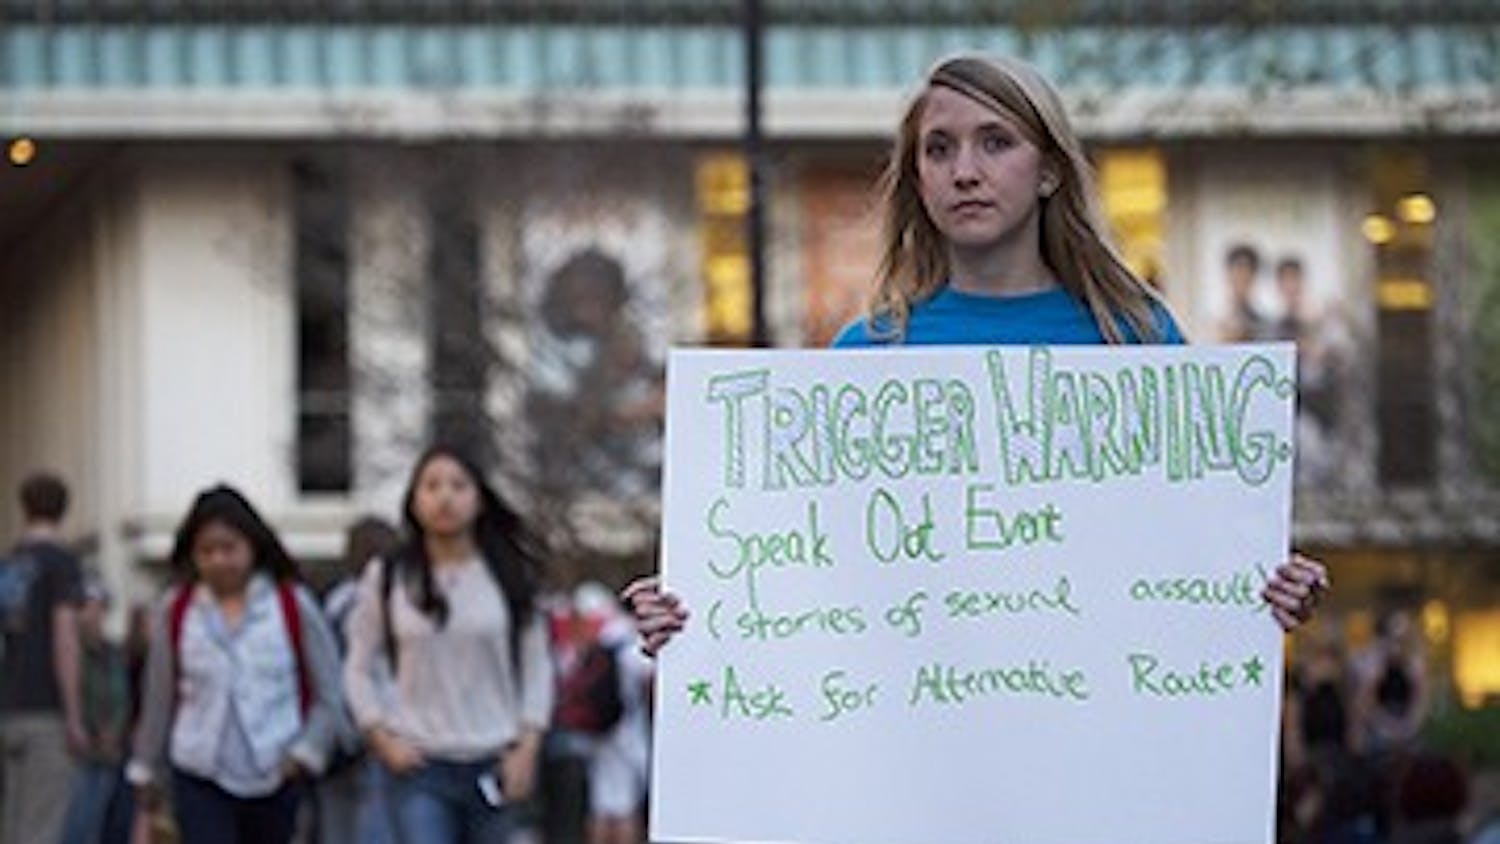 Alban Foulser directs students to Speak Out!, an event held in The Pit Tuesday evening by the Project Dinah organization. Members of the group read anonymous testimonials from survivors of sexual assault to students and onlookers.